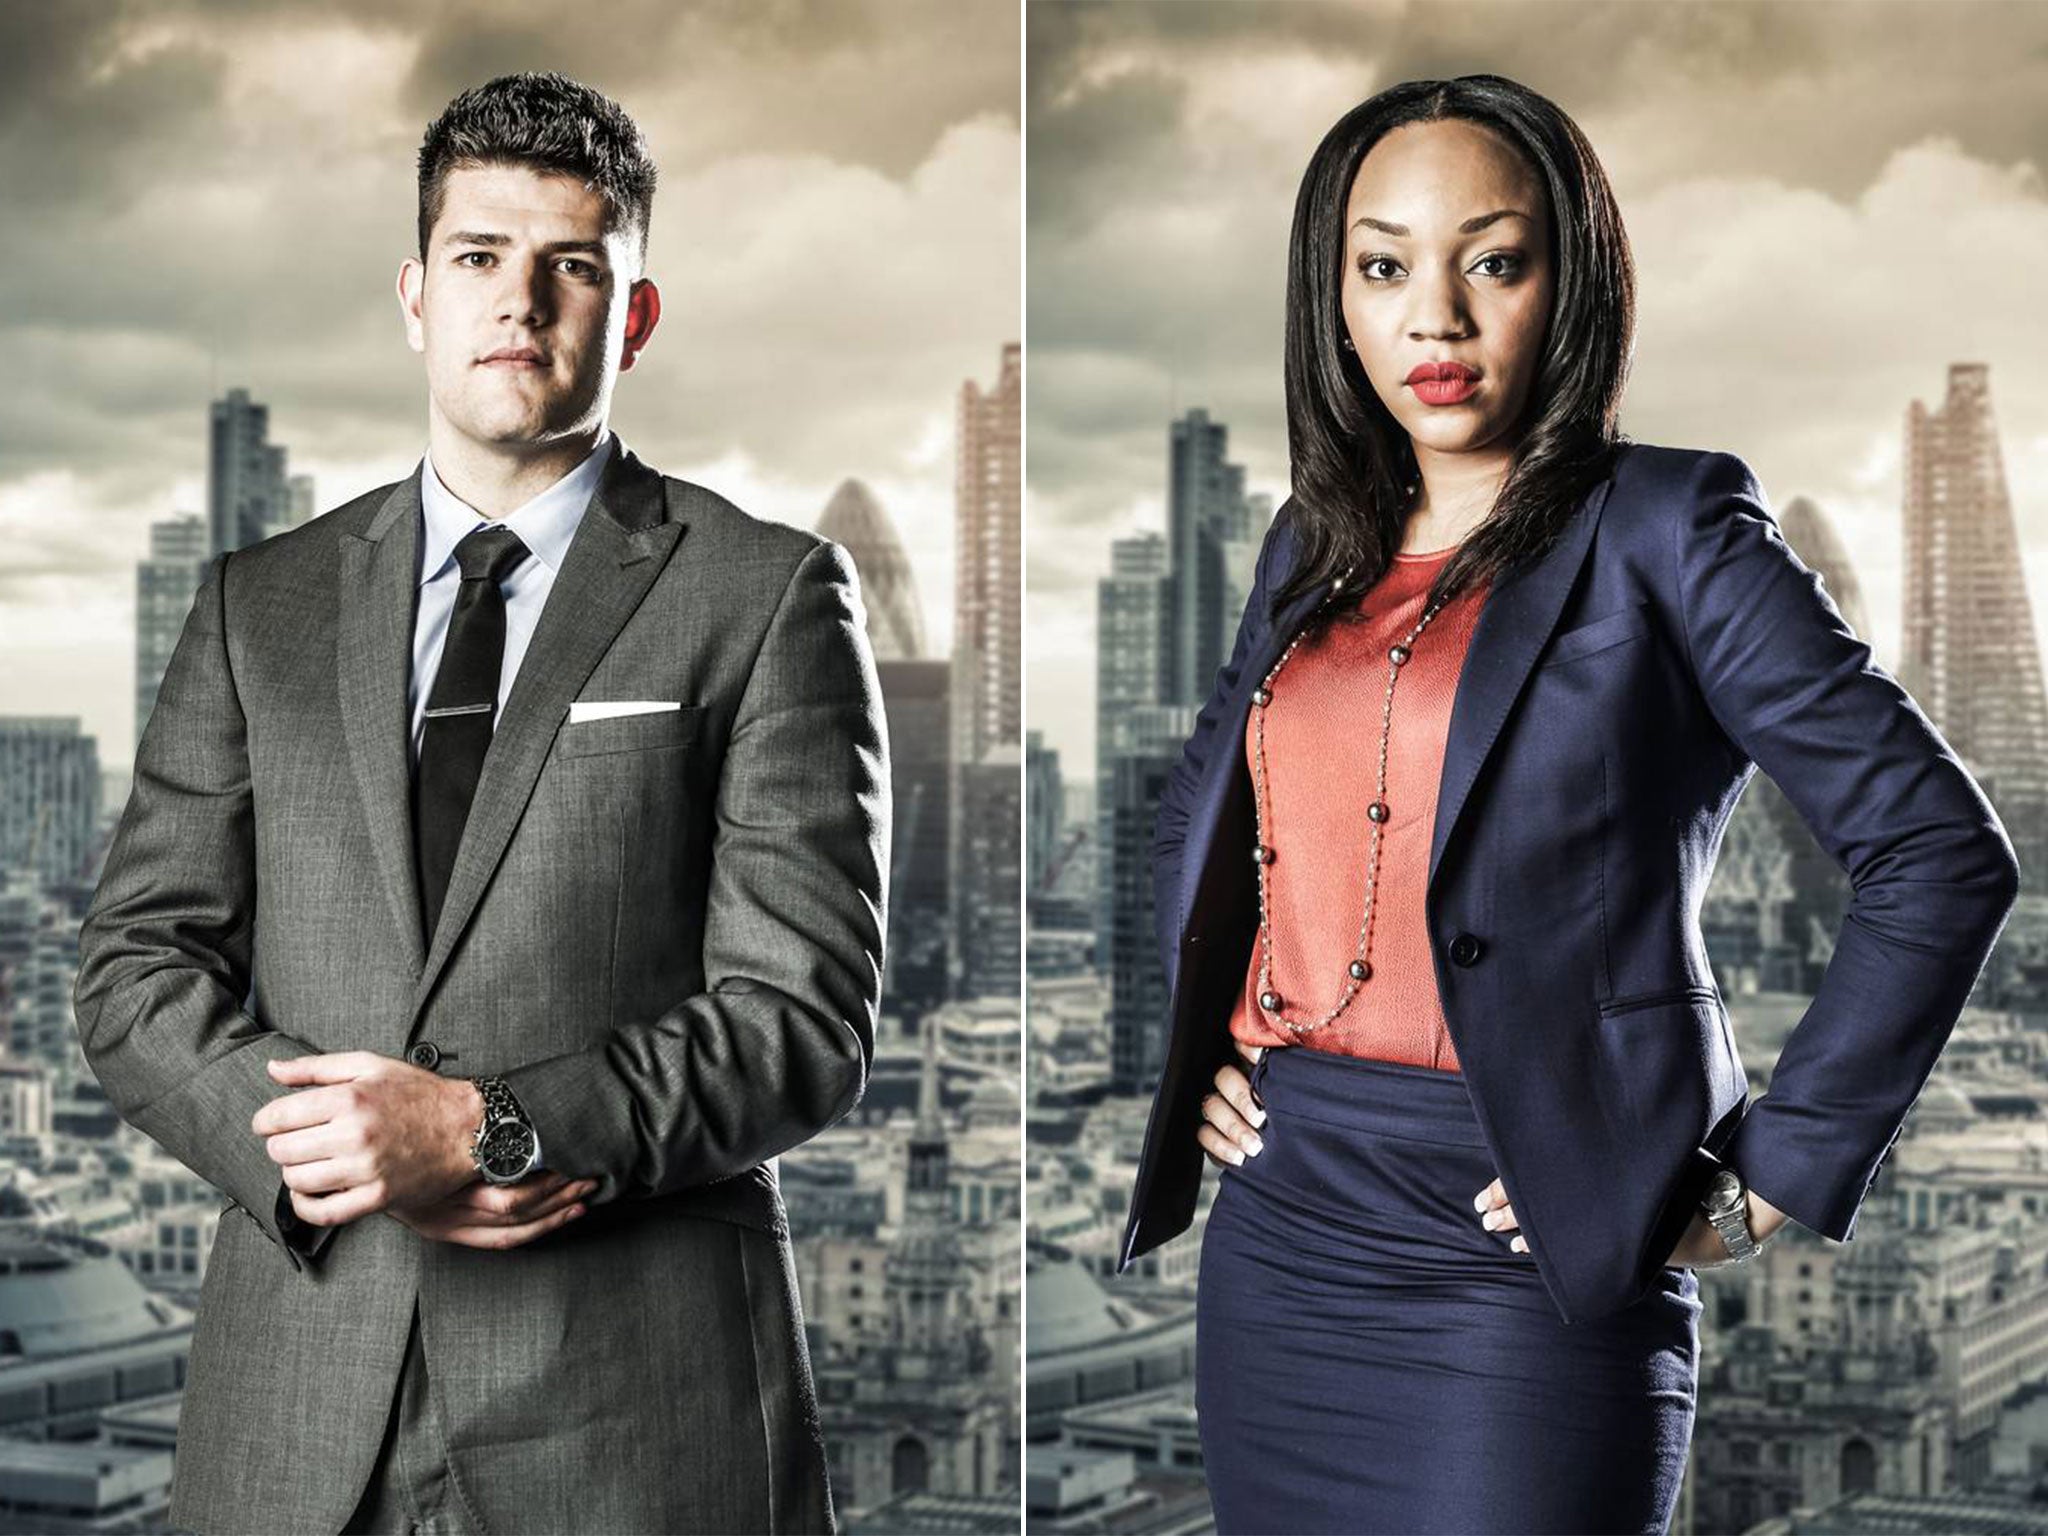 Mark Wright and Bianca Miller will compete in the final of The Apprentice